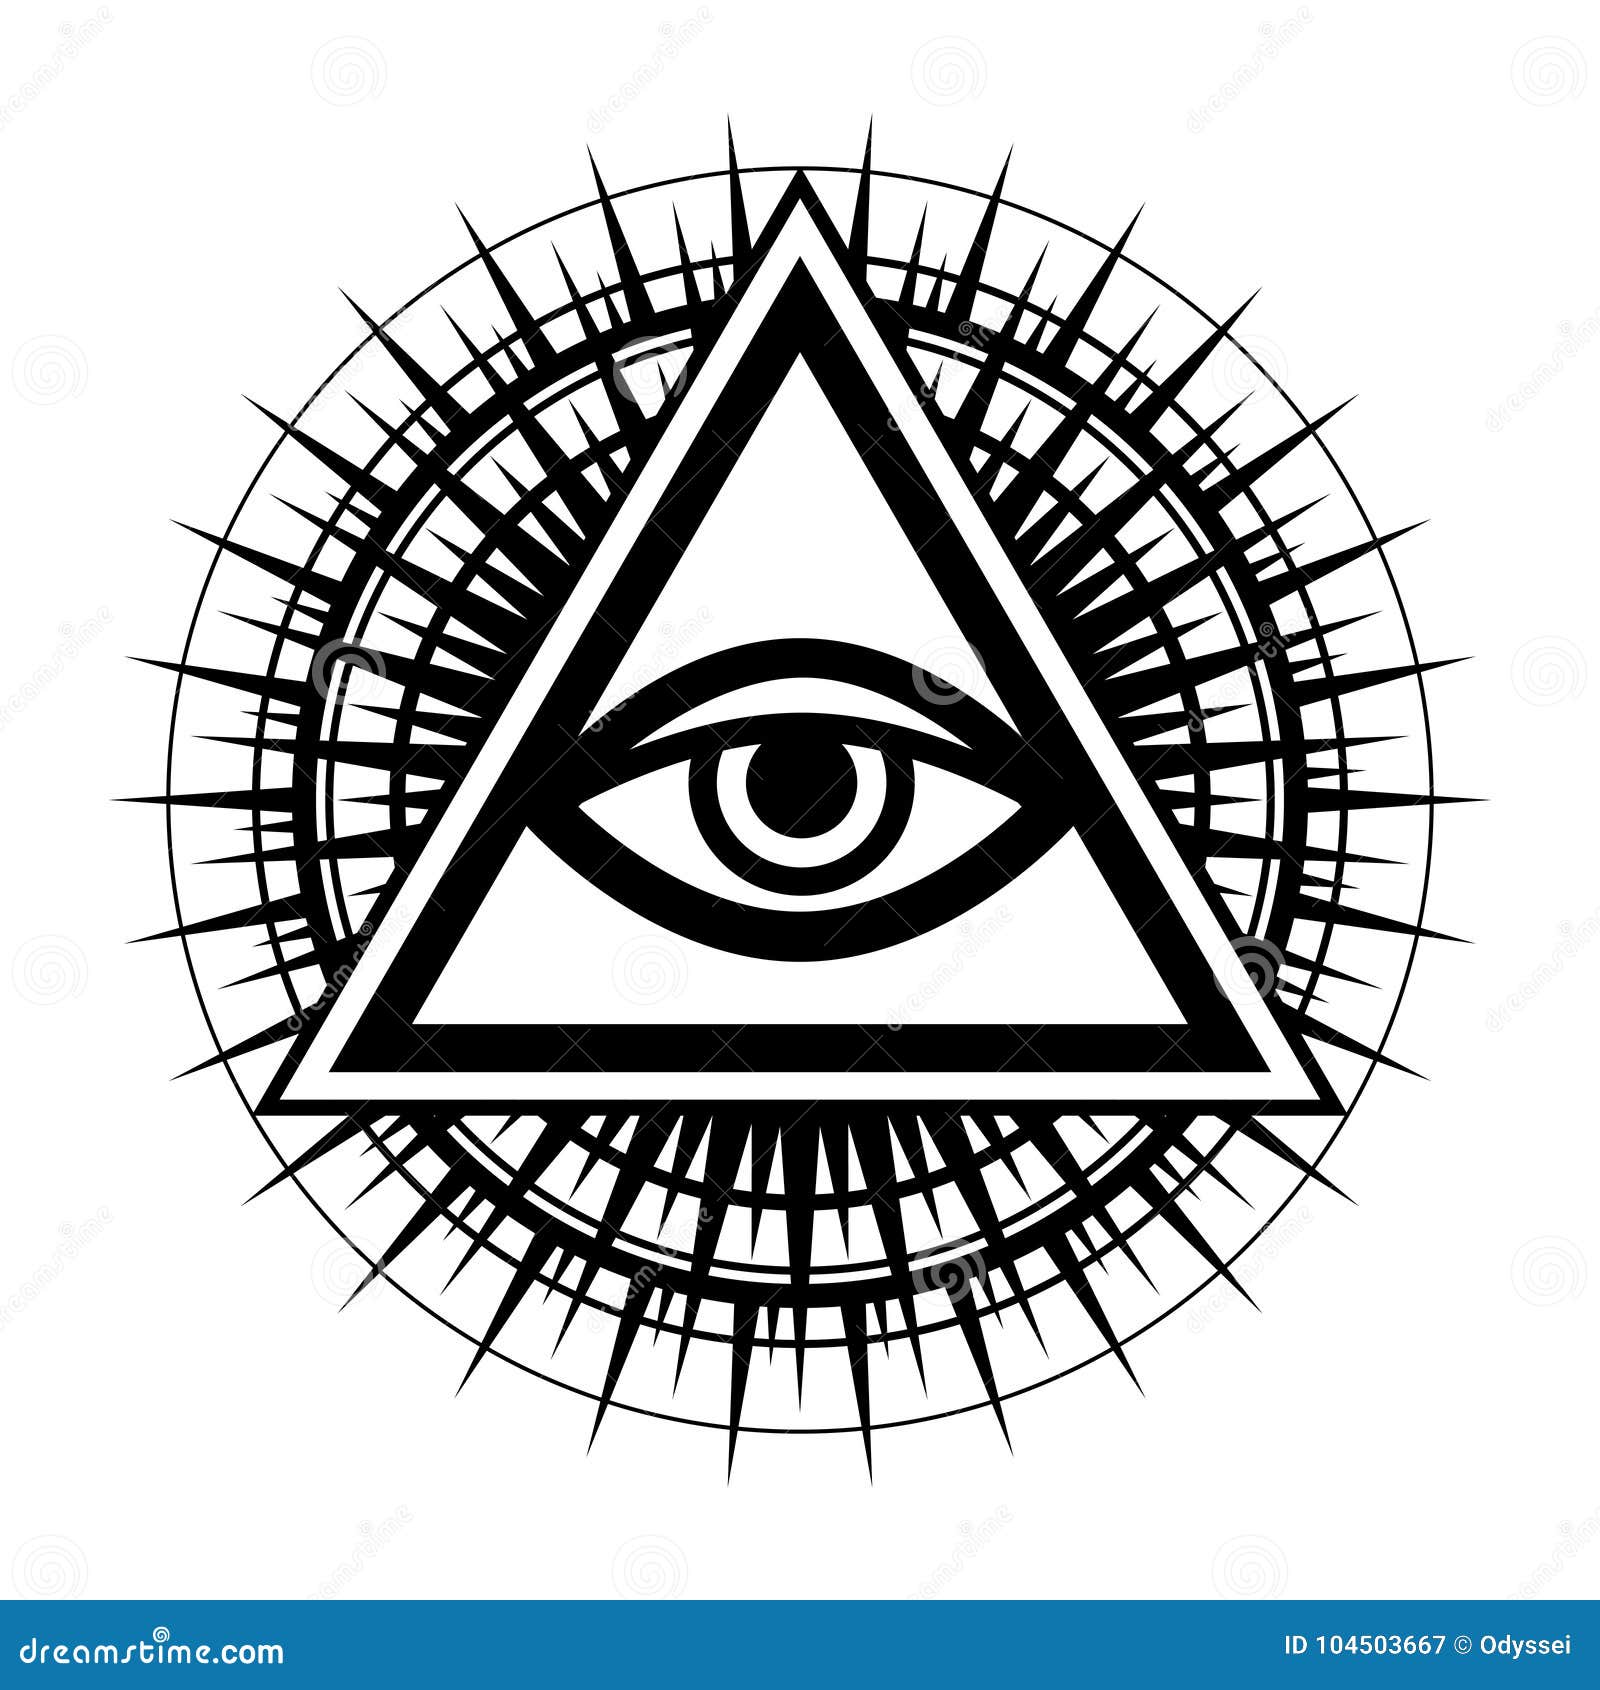 all-seeing eye (the eye of providence)